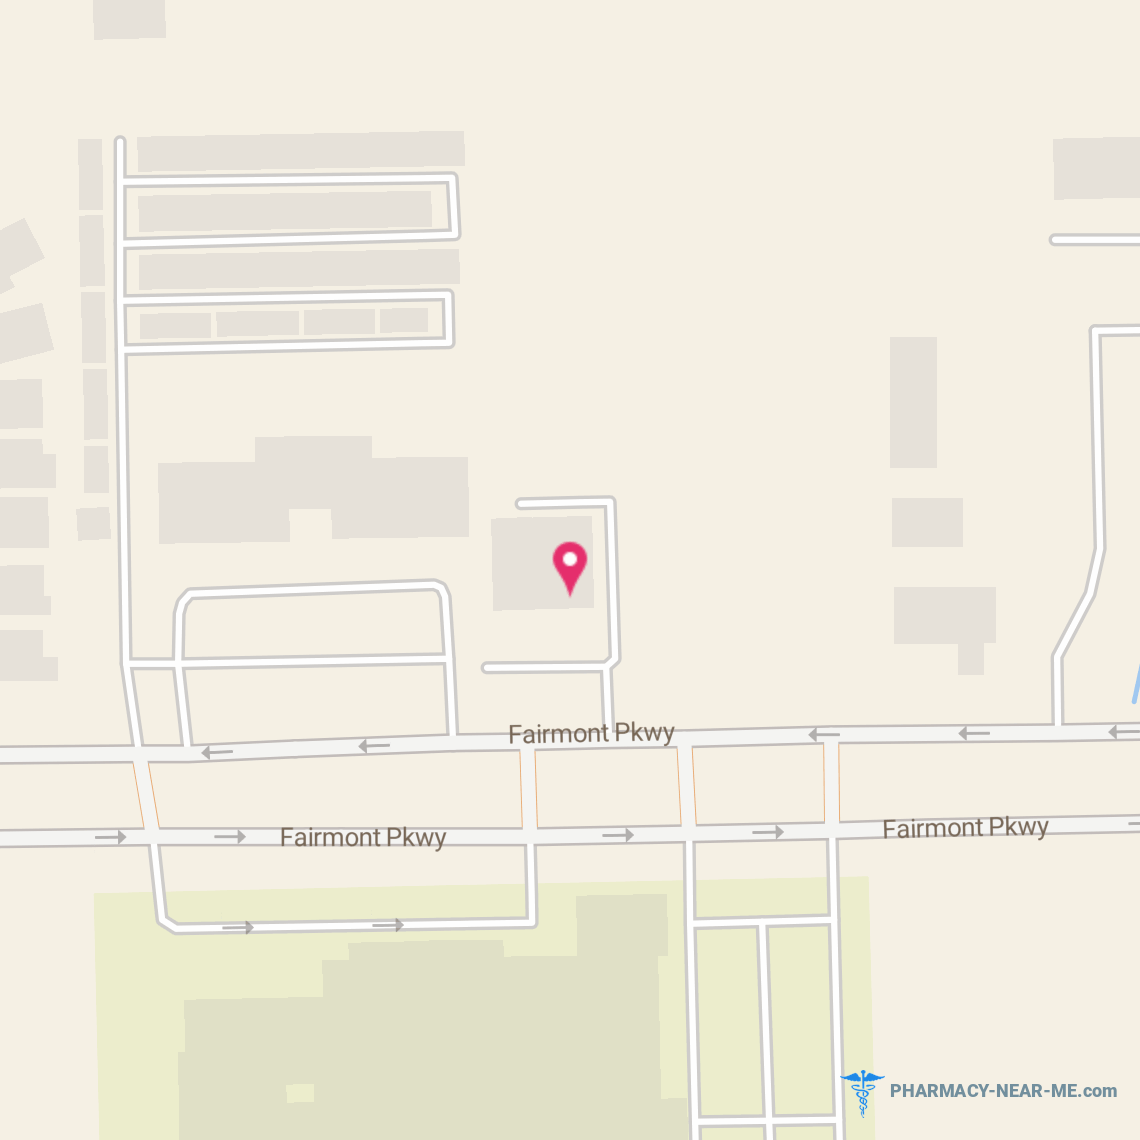 PCF PHARMACY #88 - Pharmacy Hours, Phone, Reviews & Information: 1017 Fairmont Parkway, Pasadena, Texas 77504, United States